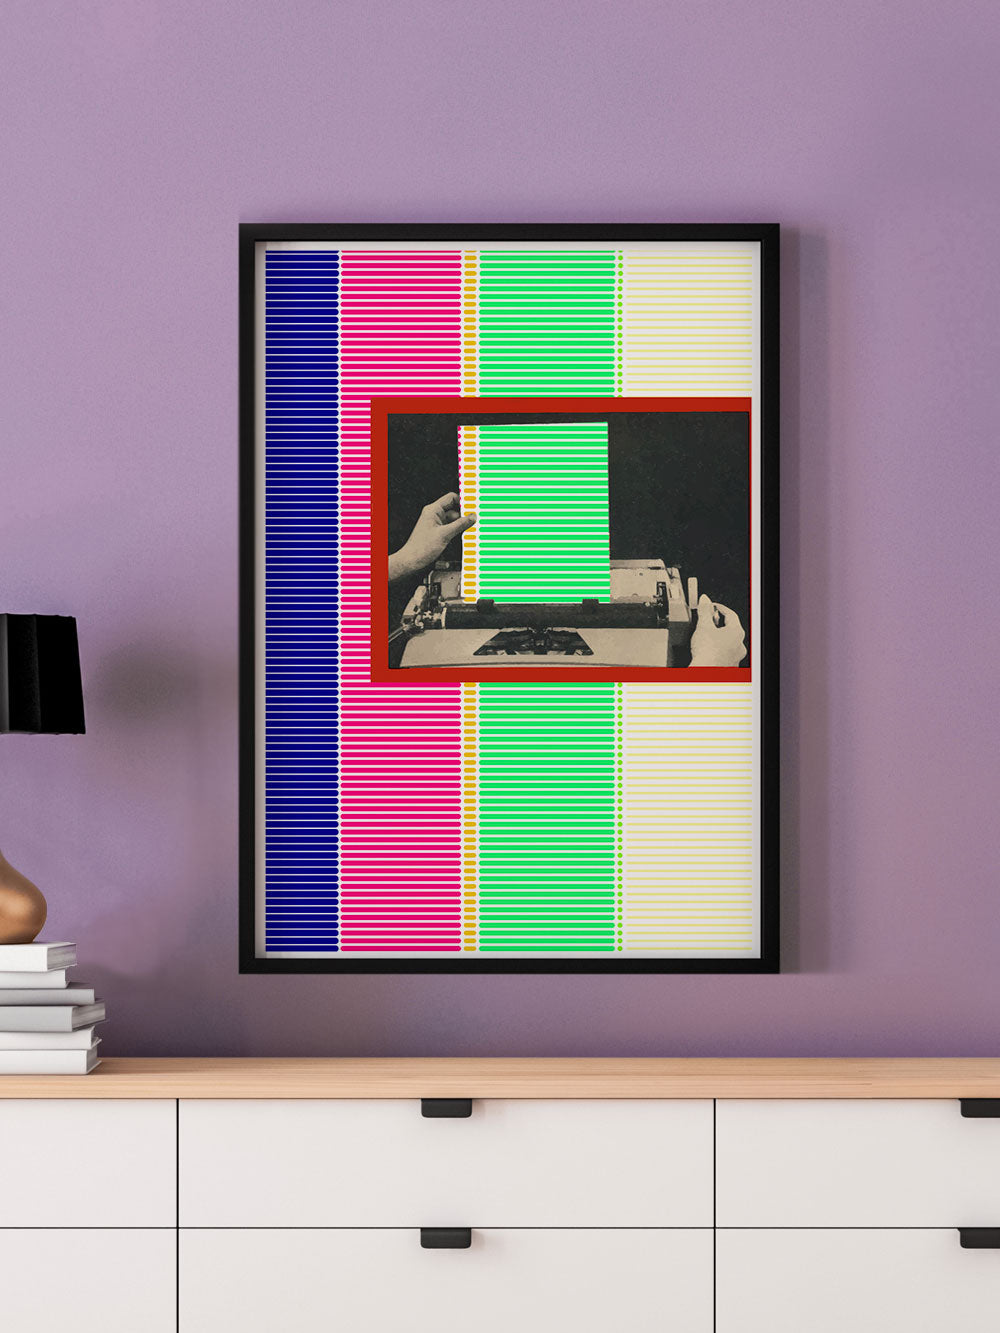 Dotted Line Matrix Retro Art Print in a frame on a wall